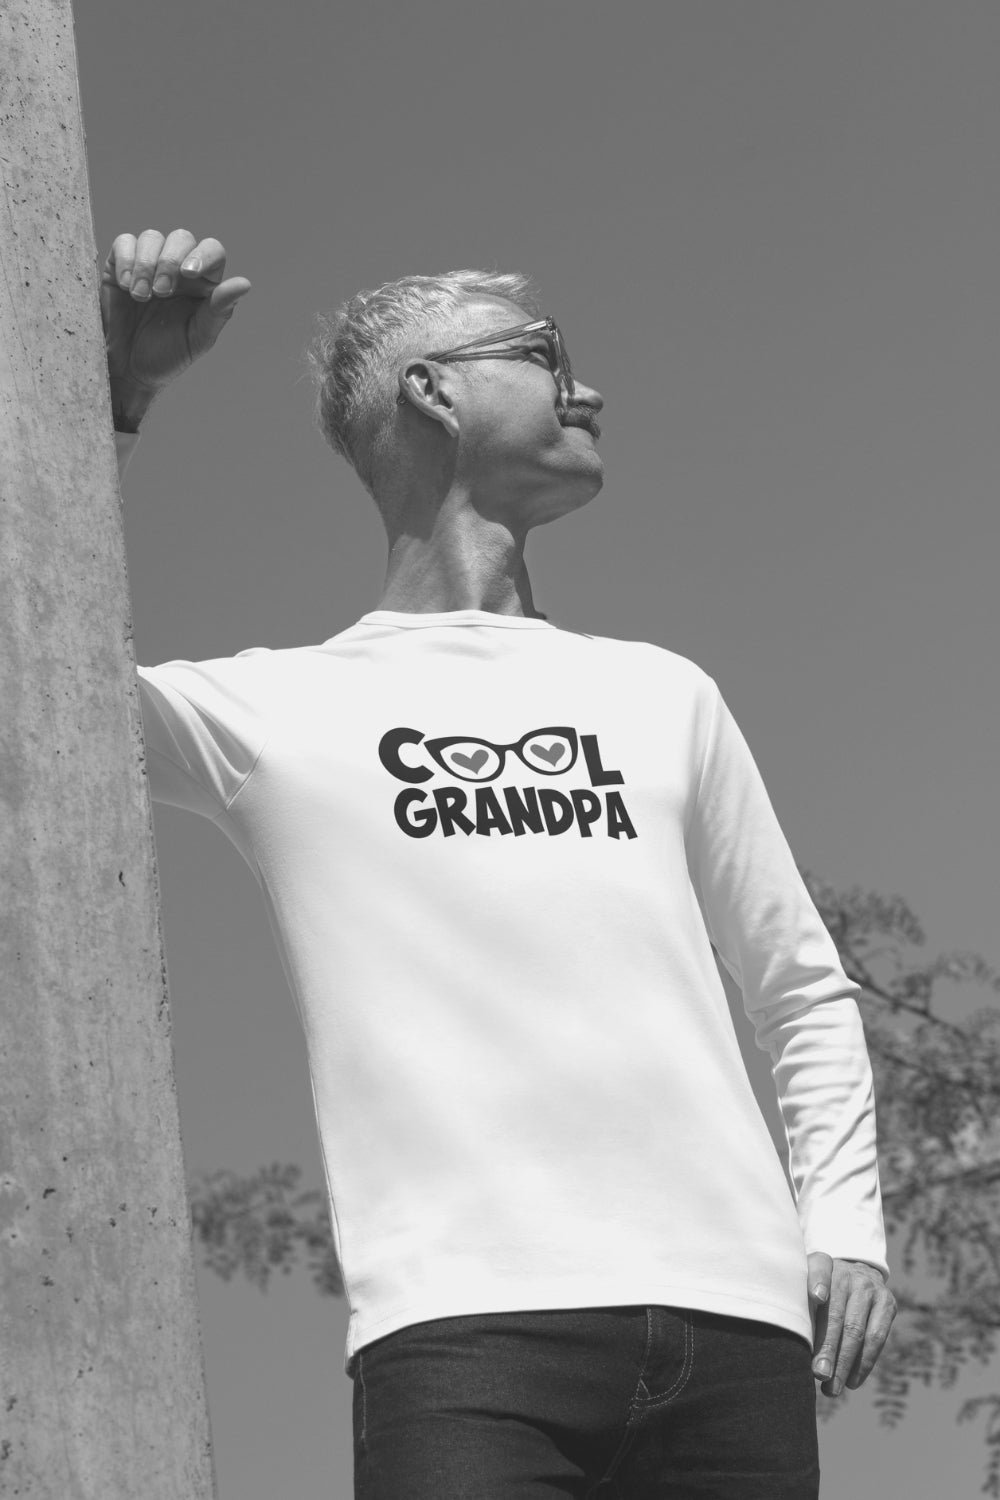 Cool Grandpa: Fun Long-Sleeve Shirt for Father's Day & More!